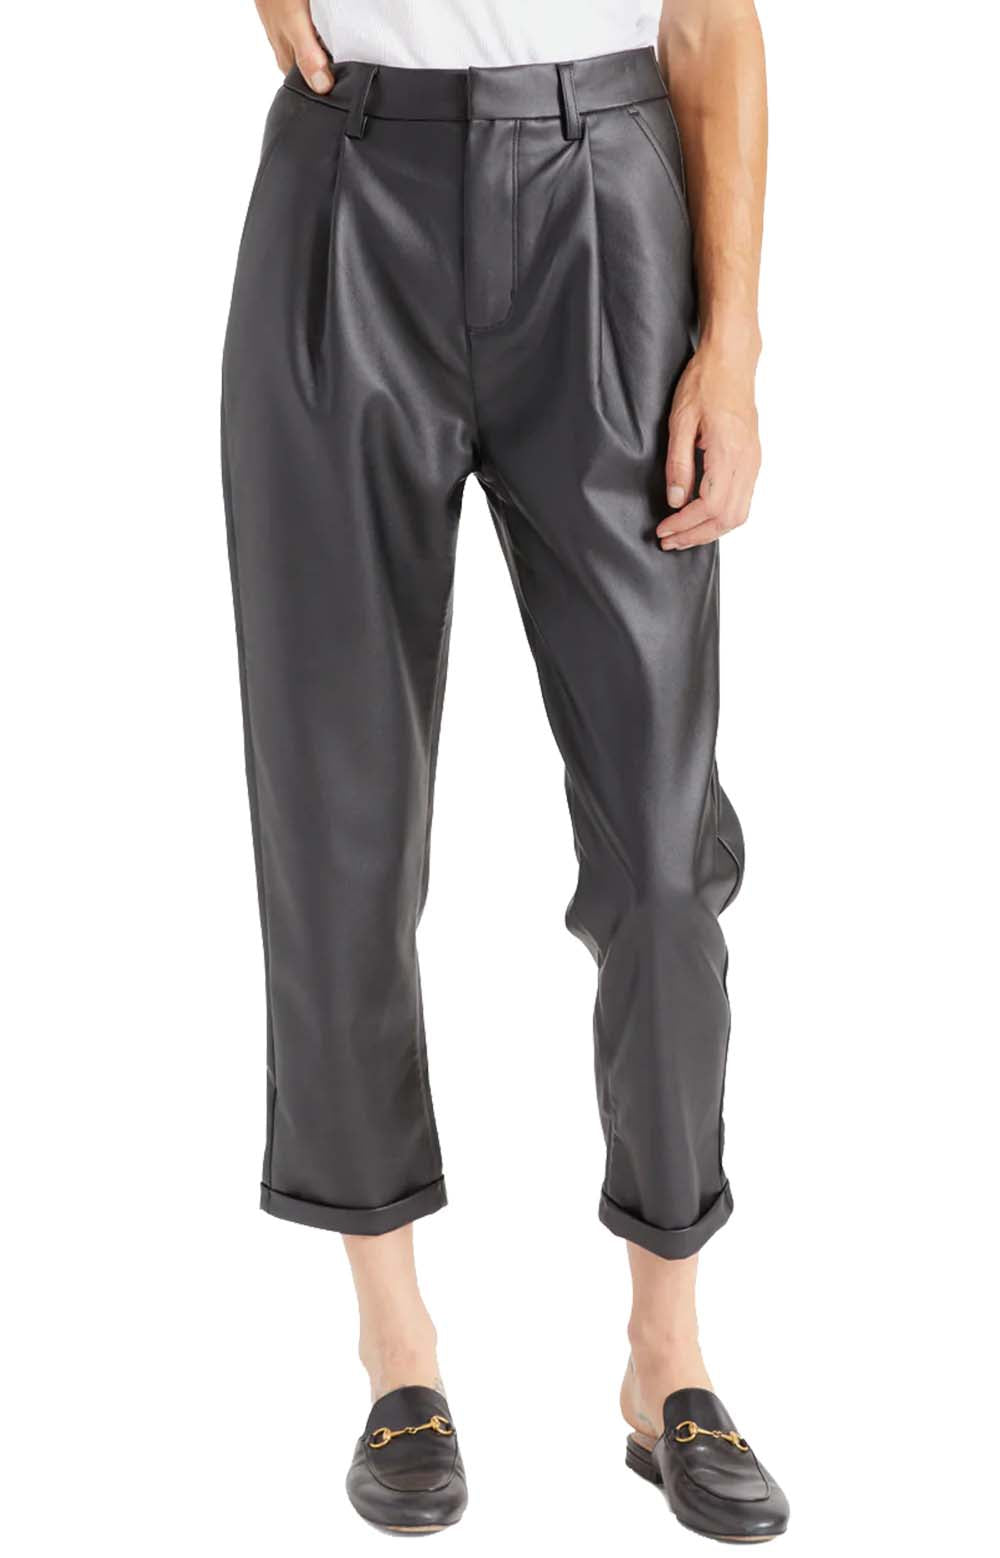 Aberdeen Leather Trouser Pant - Black